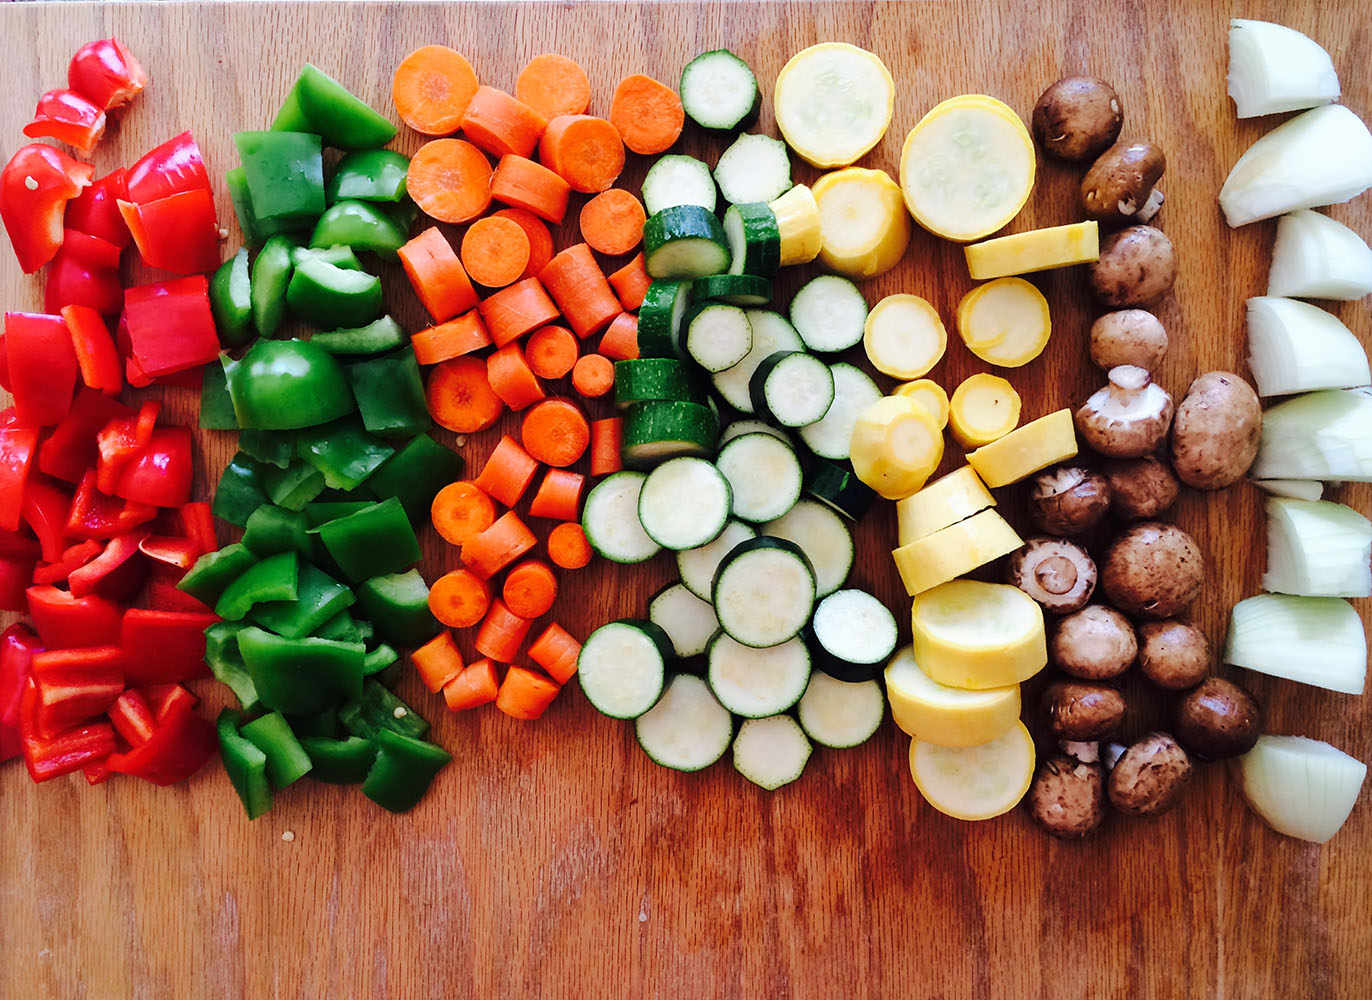 chopped peppers, carrots, mushrooms, union, cucumber vegetables